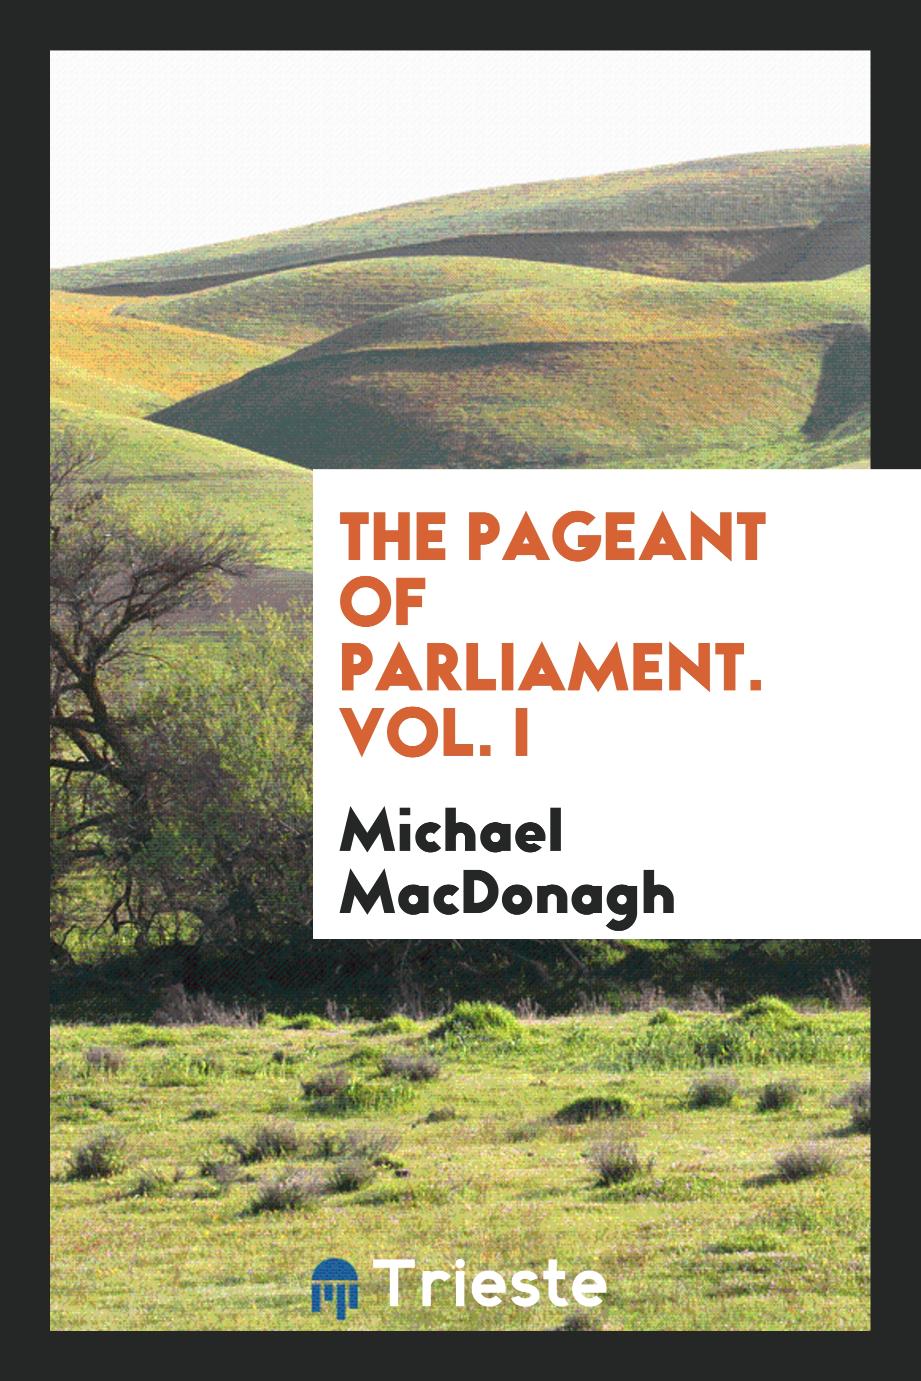 The pageant of Parliament. Vol. I